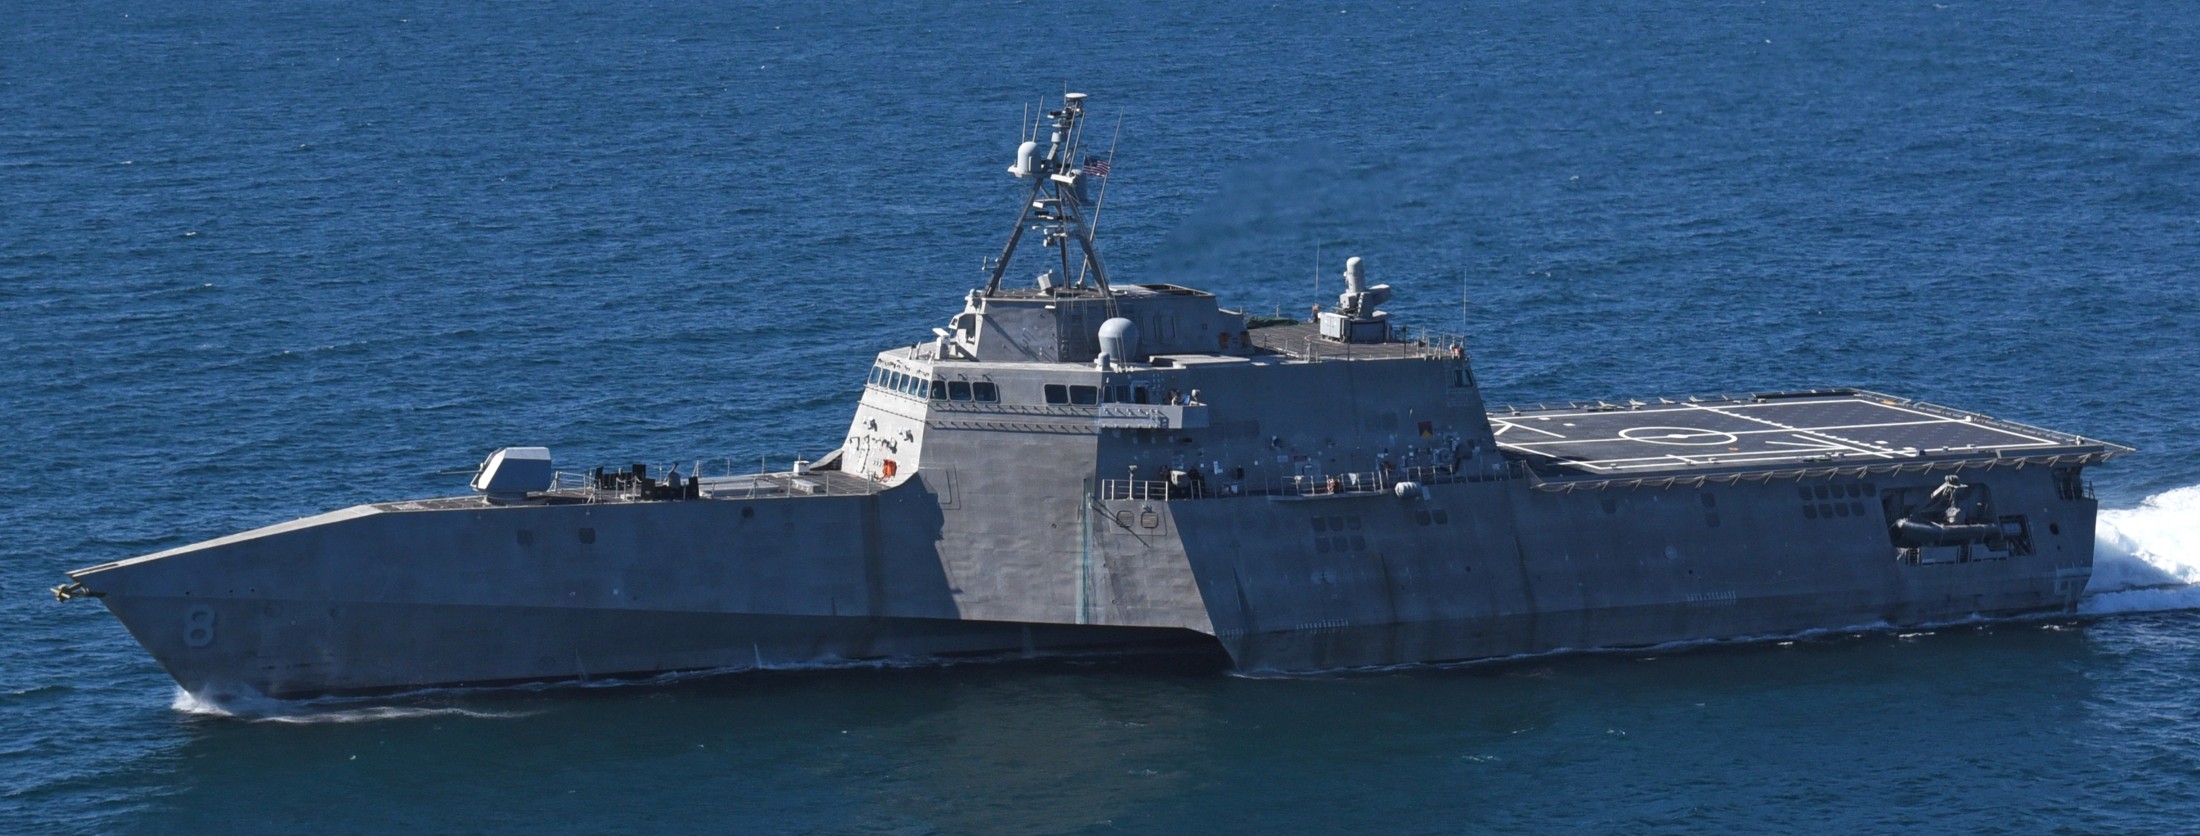 lcs-8 uss montgomery independence class littoral combat ship us navy 49